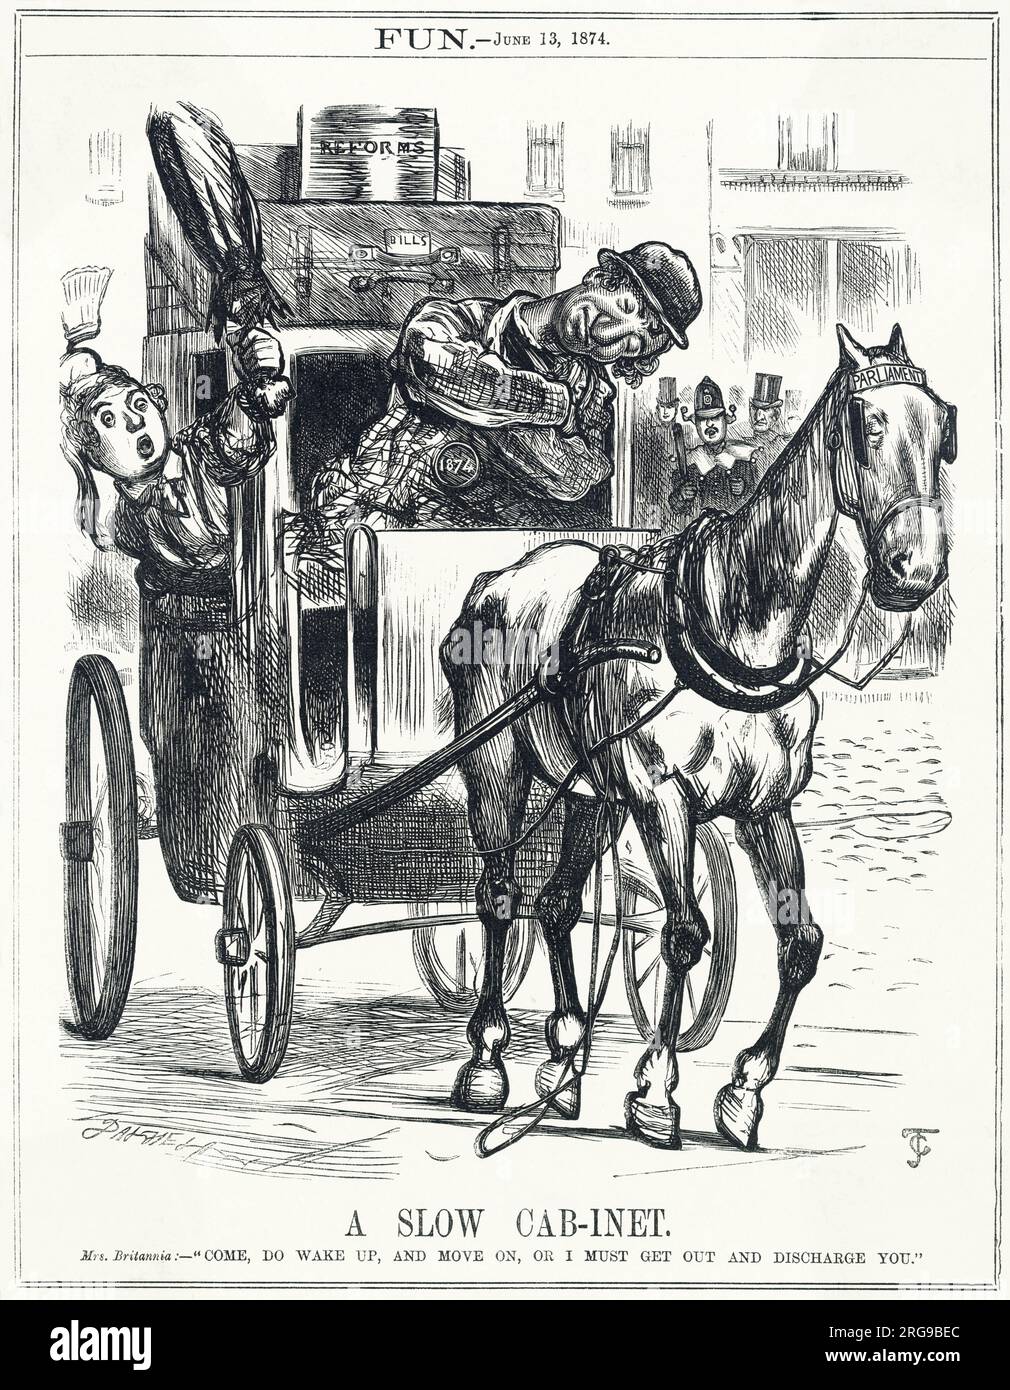 Cartoon, A Slow Cab-inet -- a satirical comment on the slow progress of parliamentary business since the Conservative Party won the General Election. Benjamin Disraeli is depicted as a cabman falling asleep and letting his horse's reins drop, while his passenger Mrs Britannia tries to wake him up and move him on. Her luggage on top of the cab represents Reforms and Bills waiting to be dealt with. Stock Photo